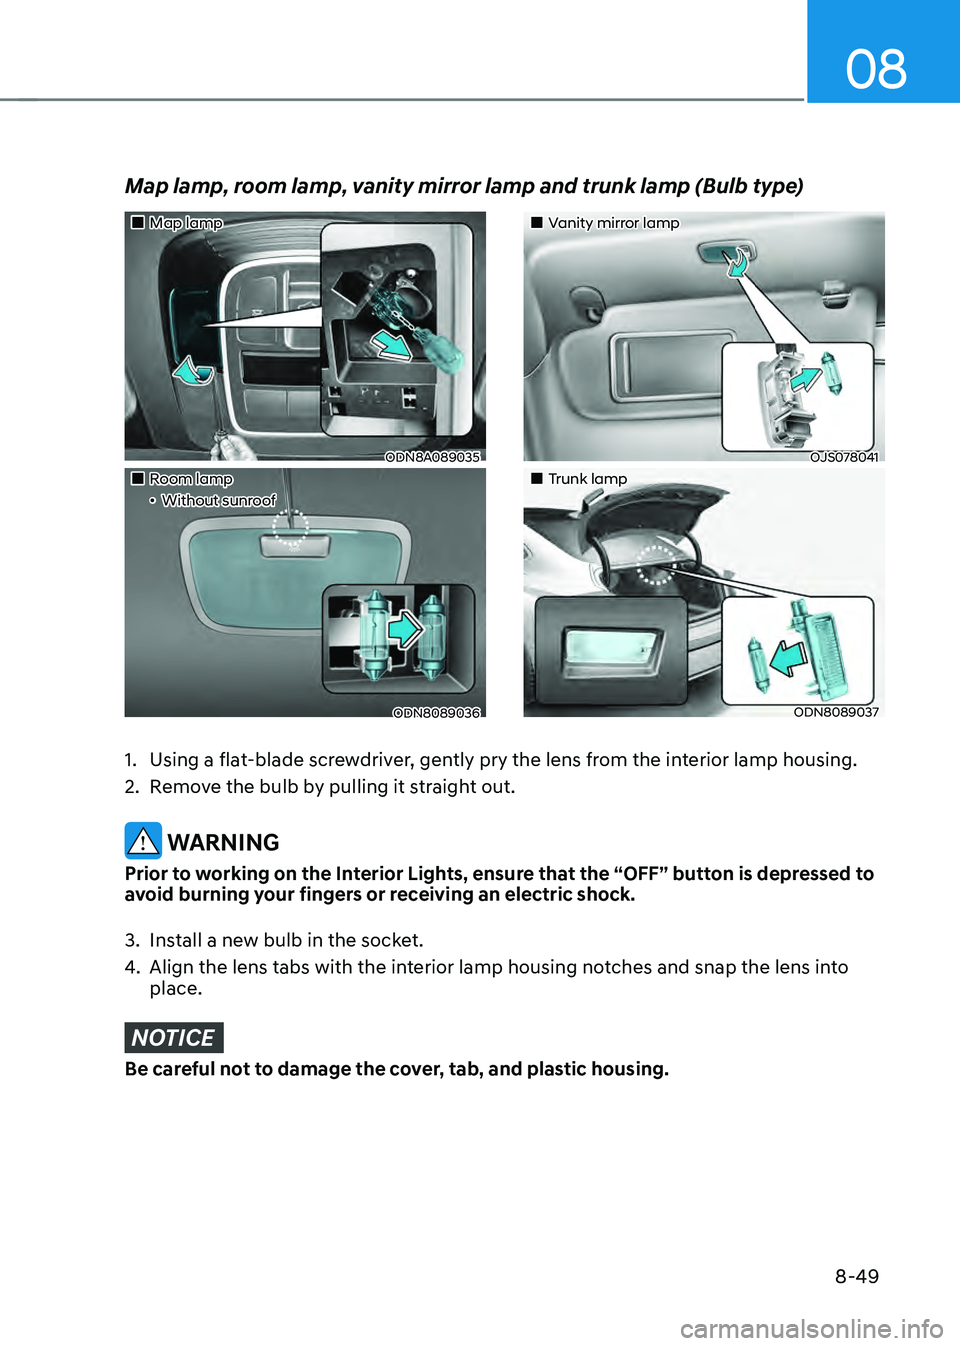 HYUNDAI SONATA HYBRID 2022 User Guide 08
8-49
„„Map lamp
ODN8A089035
„„Room lamp„ǴWithout sunroof
ODN8089036
„„Vanity mirror lamp
OJS078041
„„Trunk lamp
ODN8089037
Map lamp, room lamp, vanity 